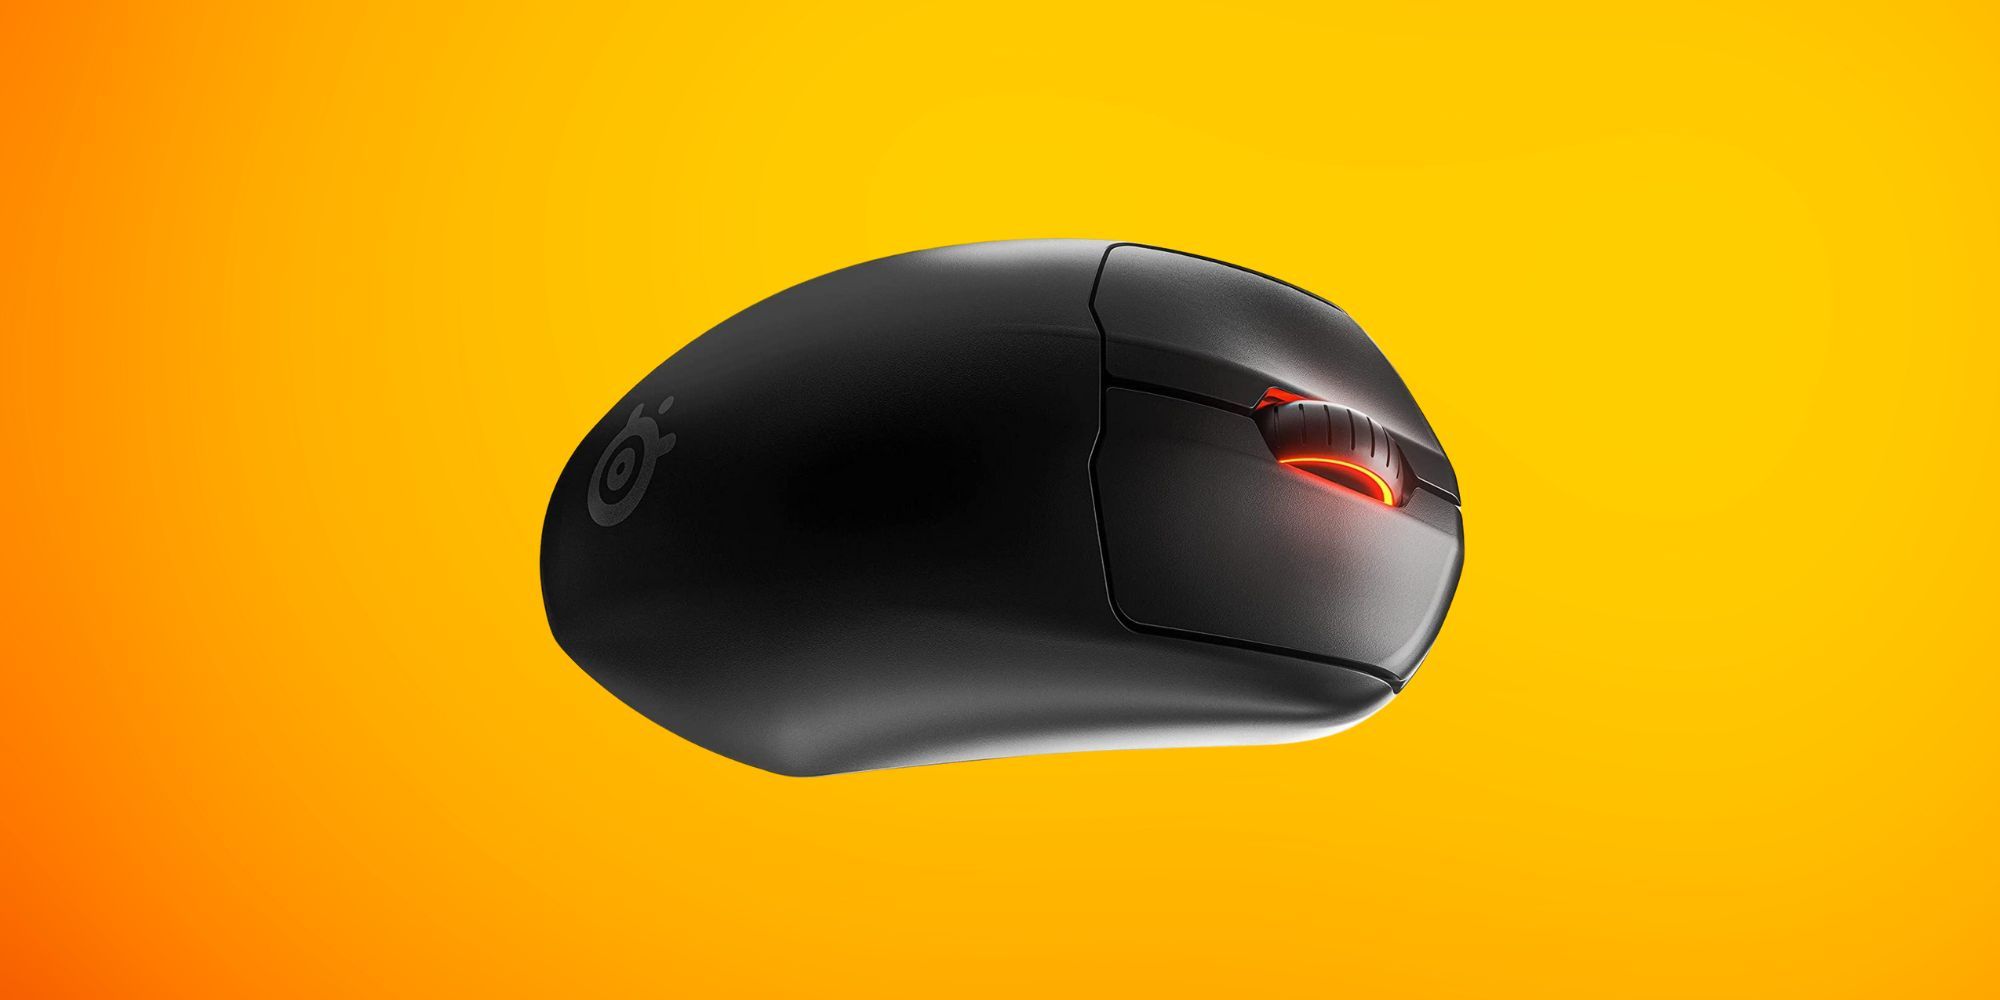 SteelSeries Prime Wireless gaming mouse